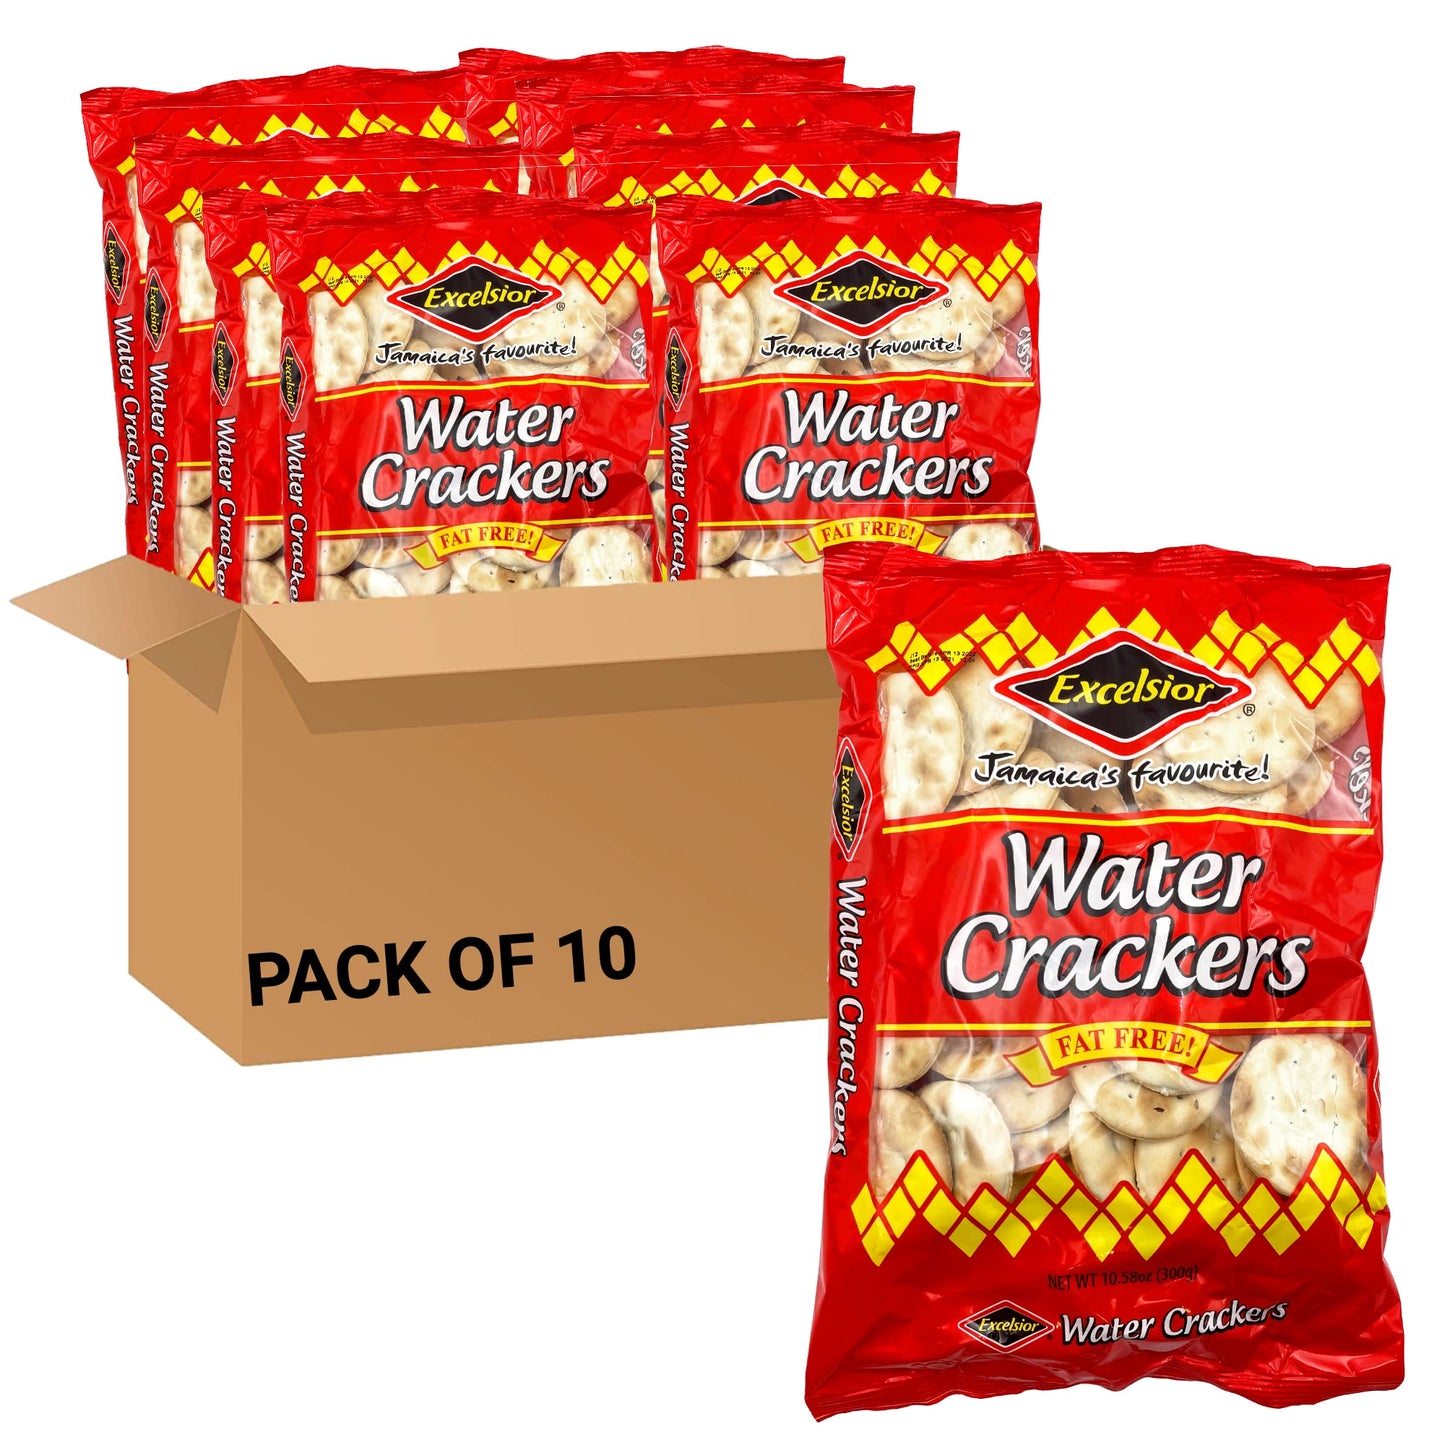 EXCELSIOR Water Crackers Genuine Jamaican Fat-Free Crackers 10.58 oz (Pack of 20)